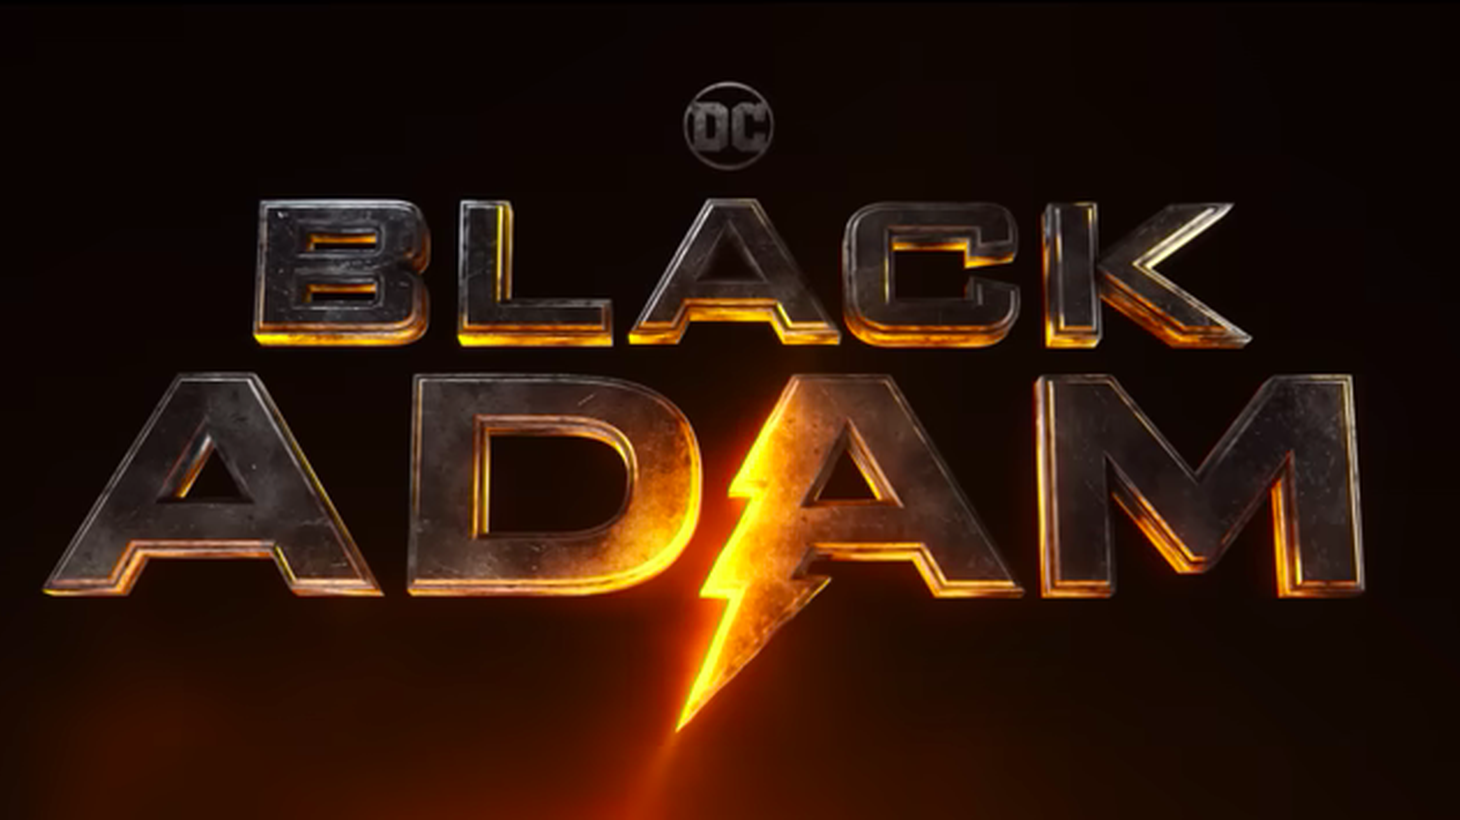 In “Black Adam,” Dwayne Johnson plays a man who was imprisoned after receiving powers of the Gods, and some 5000 years later is released into the modern world.